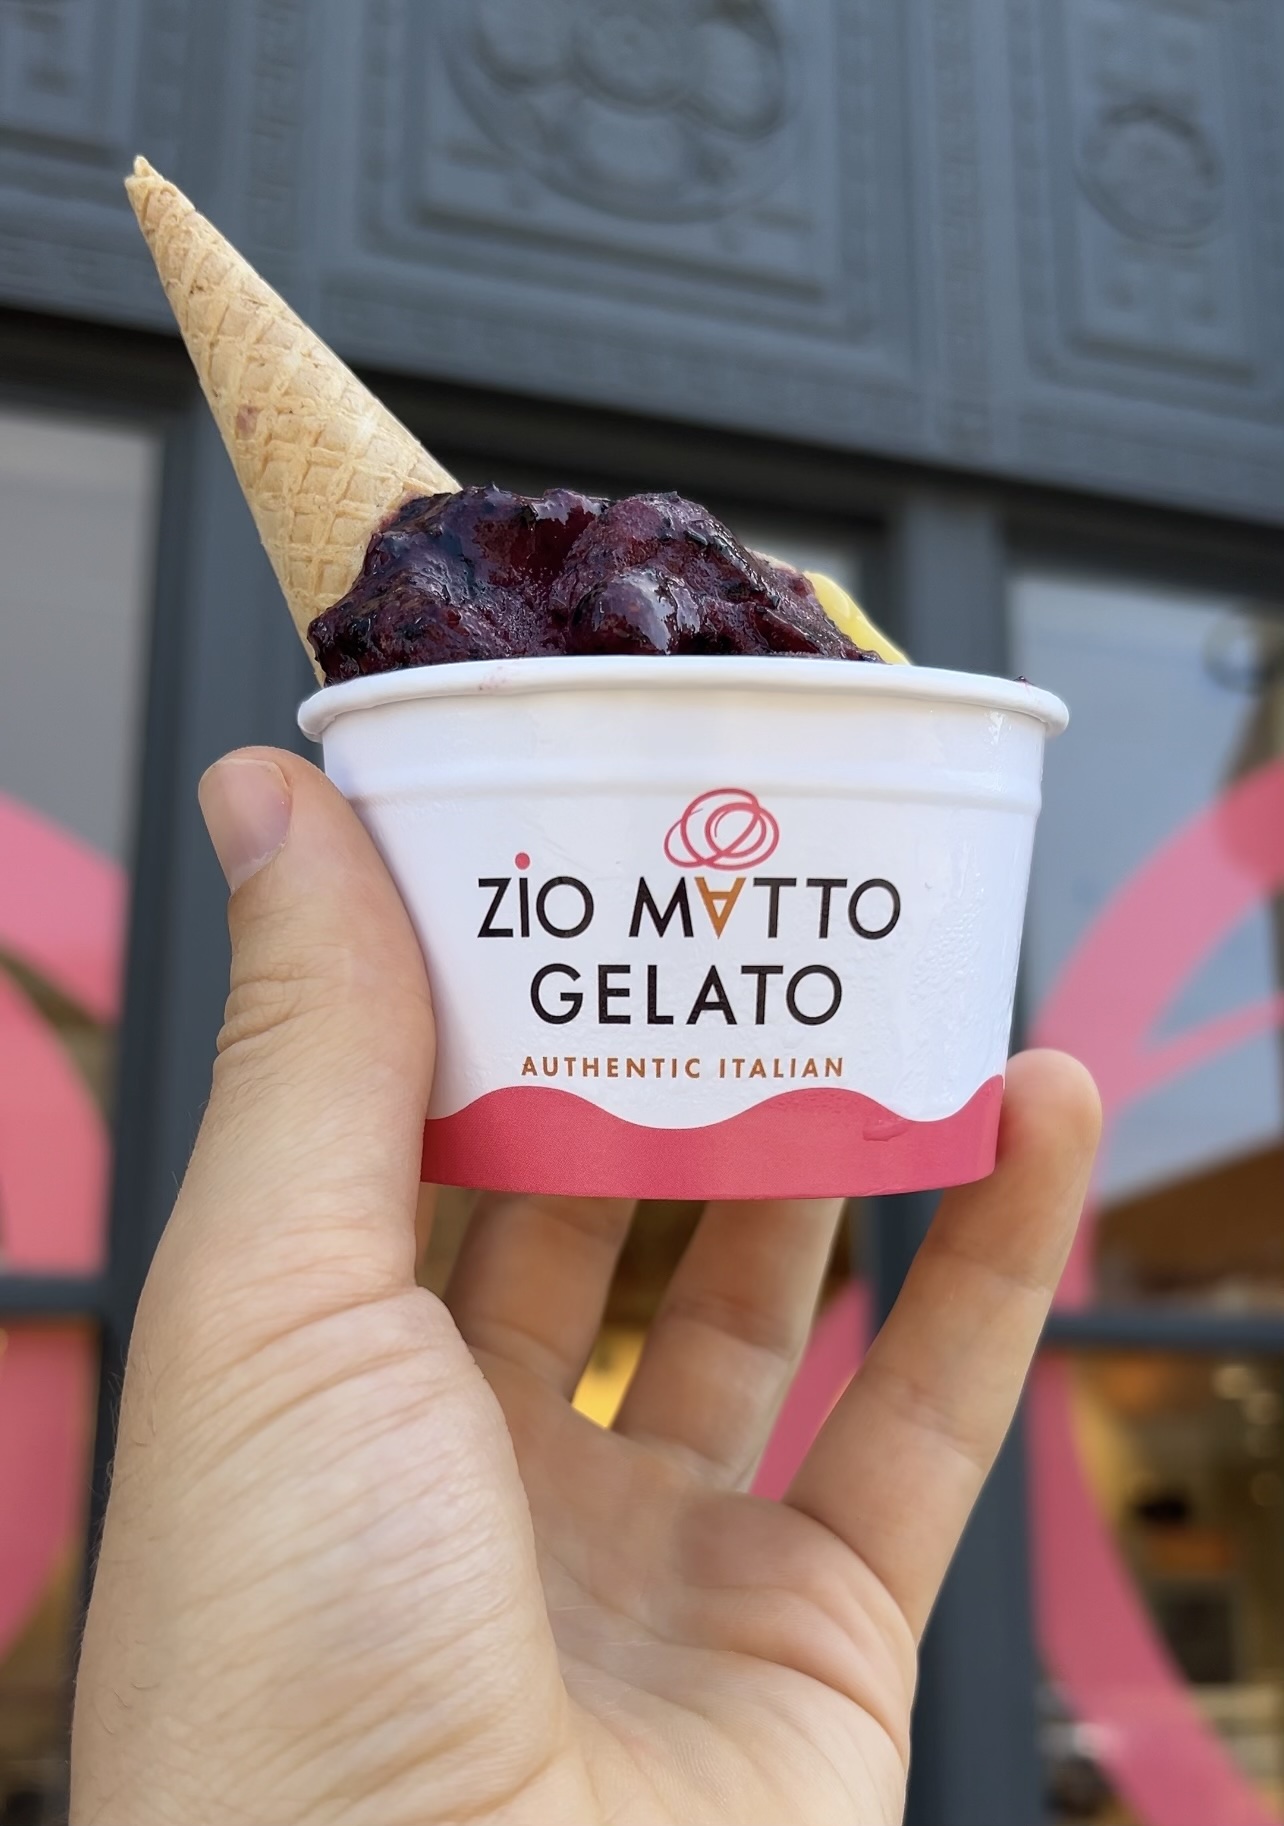 Hand holding a cup of Zio Matto Gelato with a waffle cone inserted. The gelato appears to be a dark berry flavor. The background shows a store facade, making it a must-try from the Ultimate Guide to Frozen Treats in Memphis.